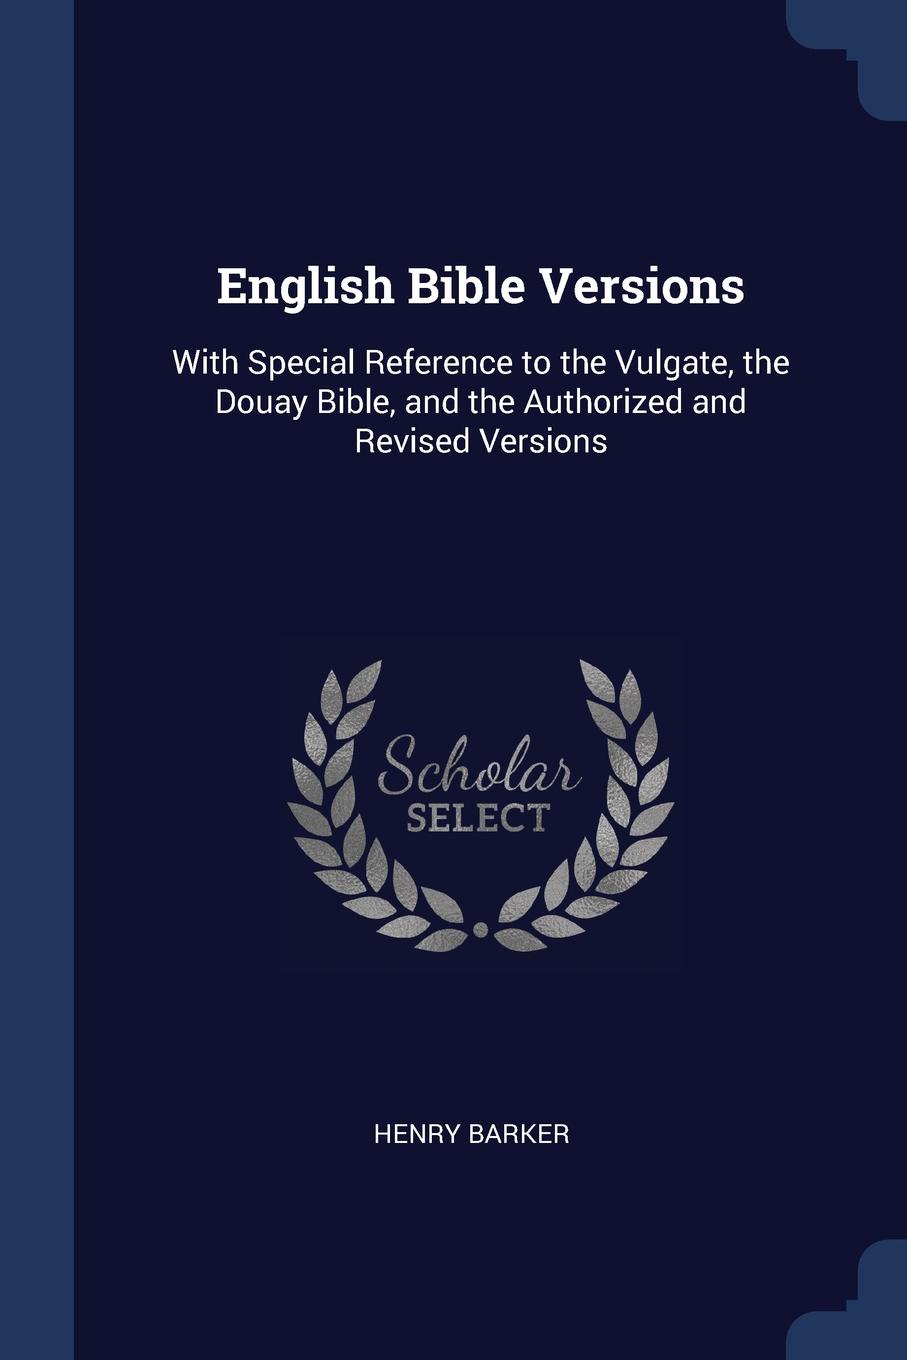 English Bible Versions. With Special Reference to the Vulgate, the Douay Bible, and the Authorized and Revised Versions